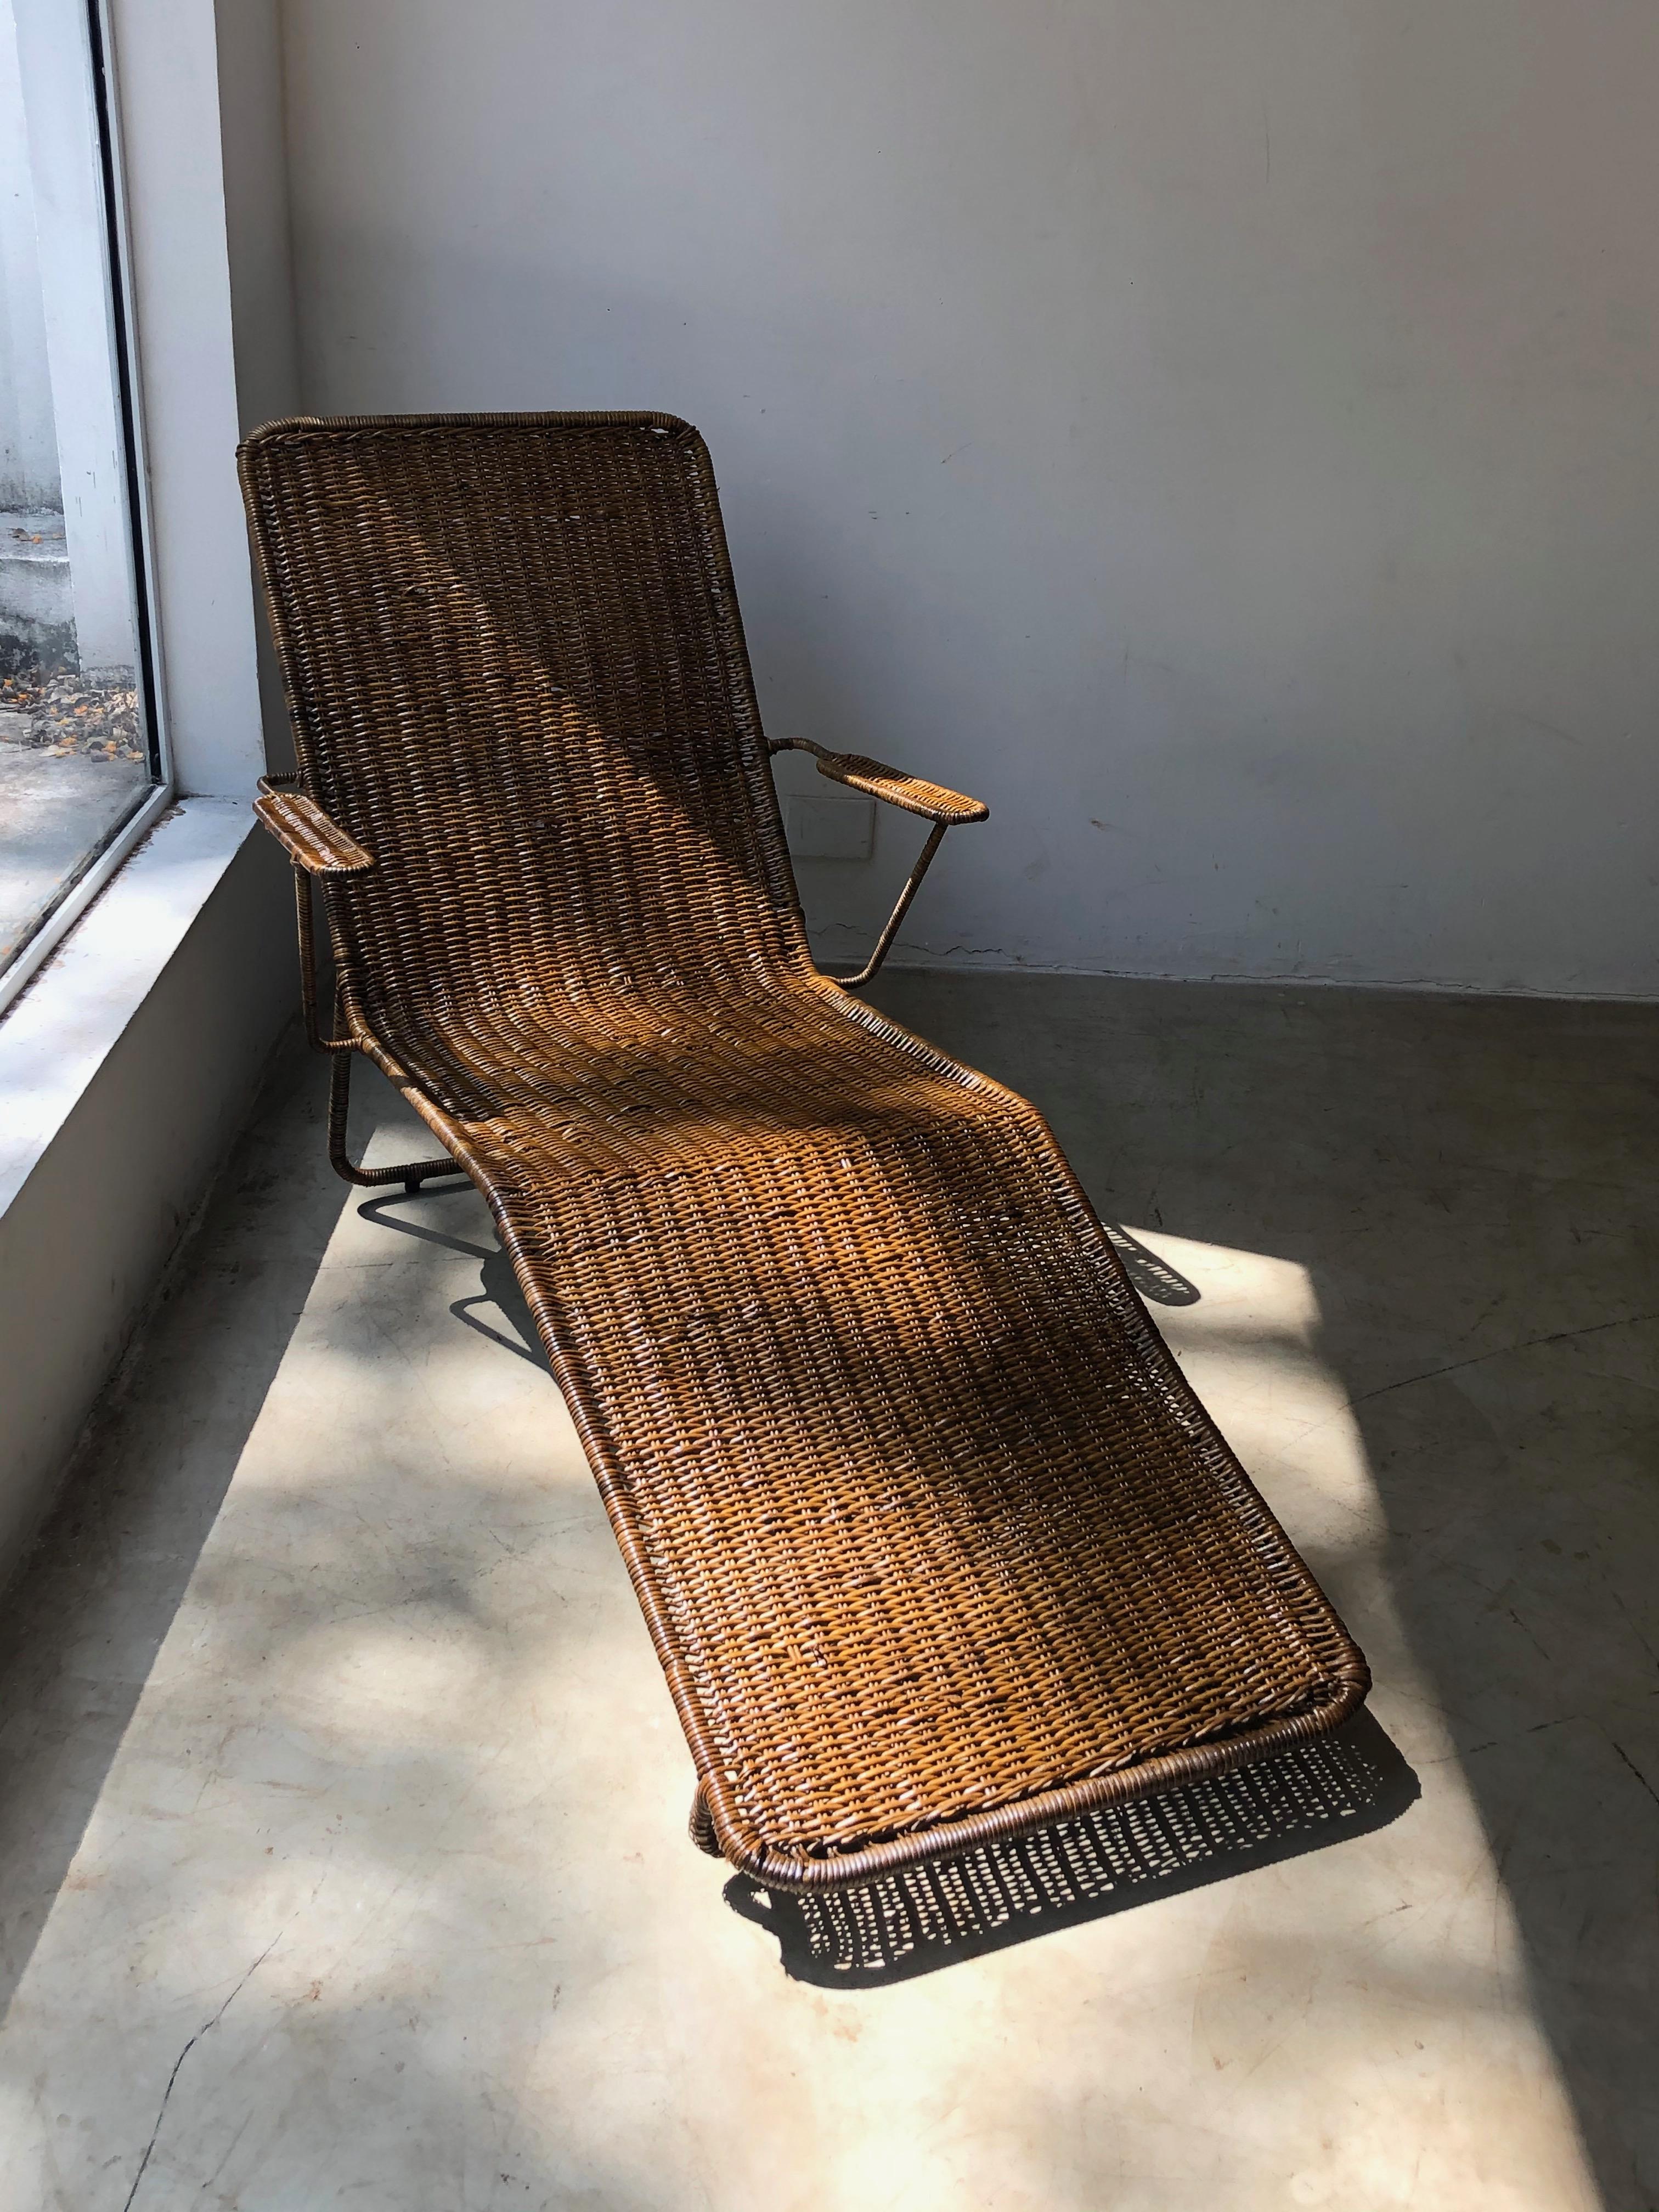 Brazilian Natural Fiber Chaise Longues - 8 For Sale on 1stDibs